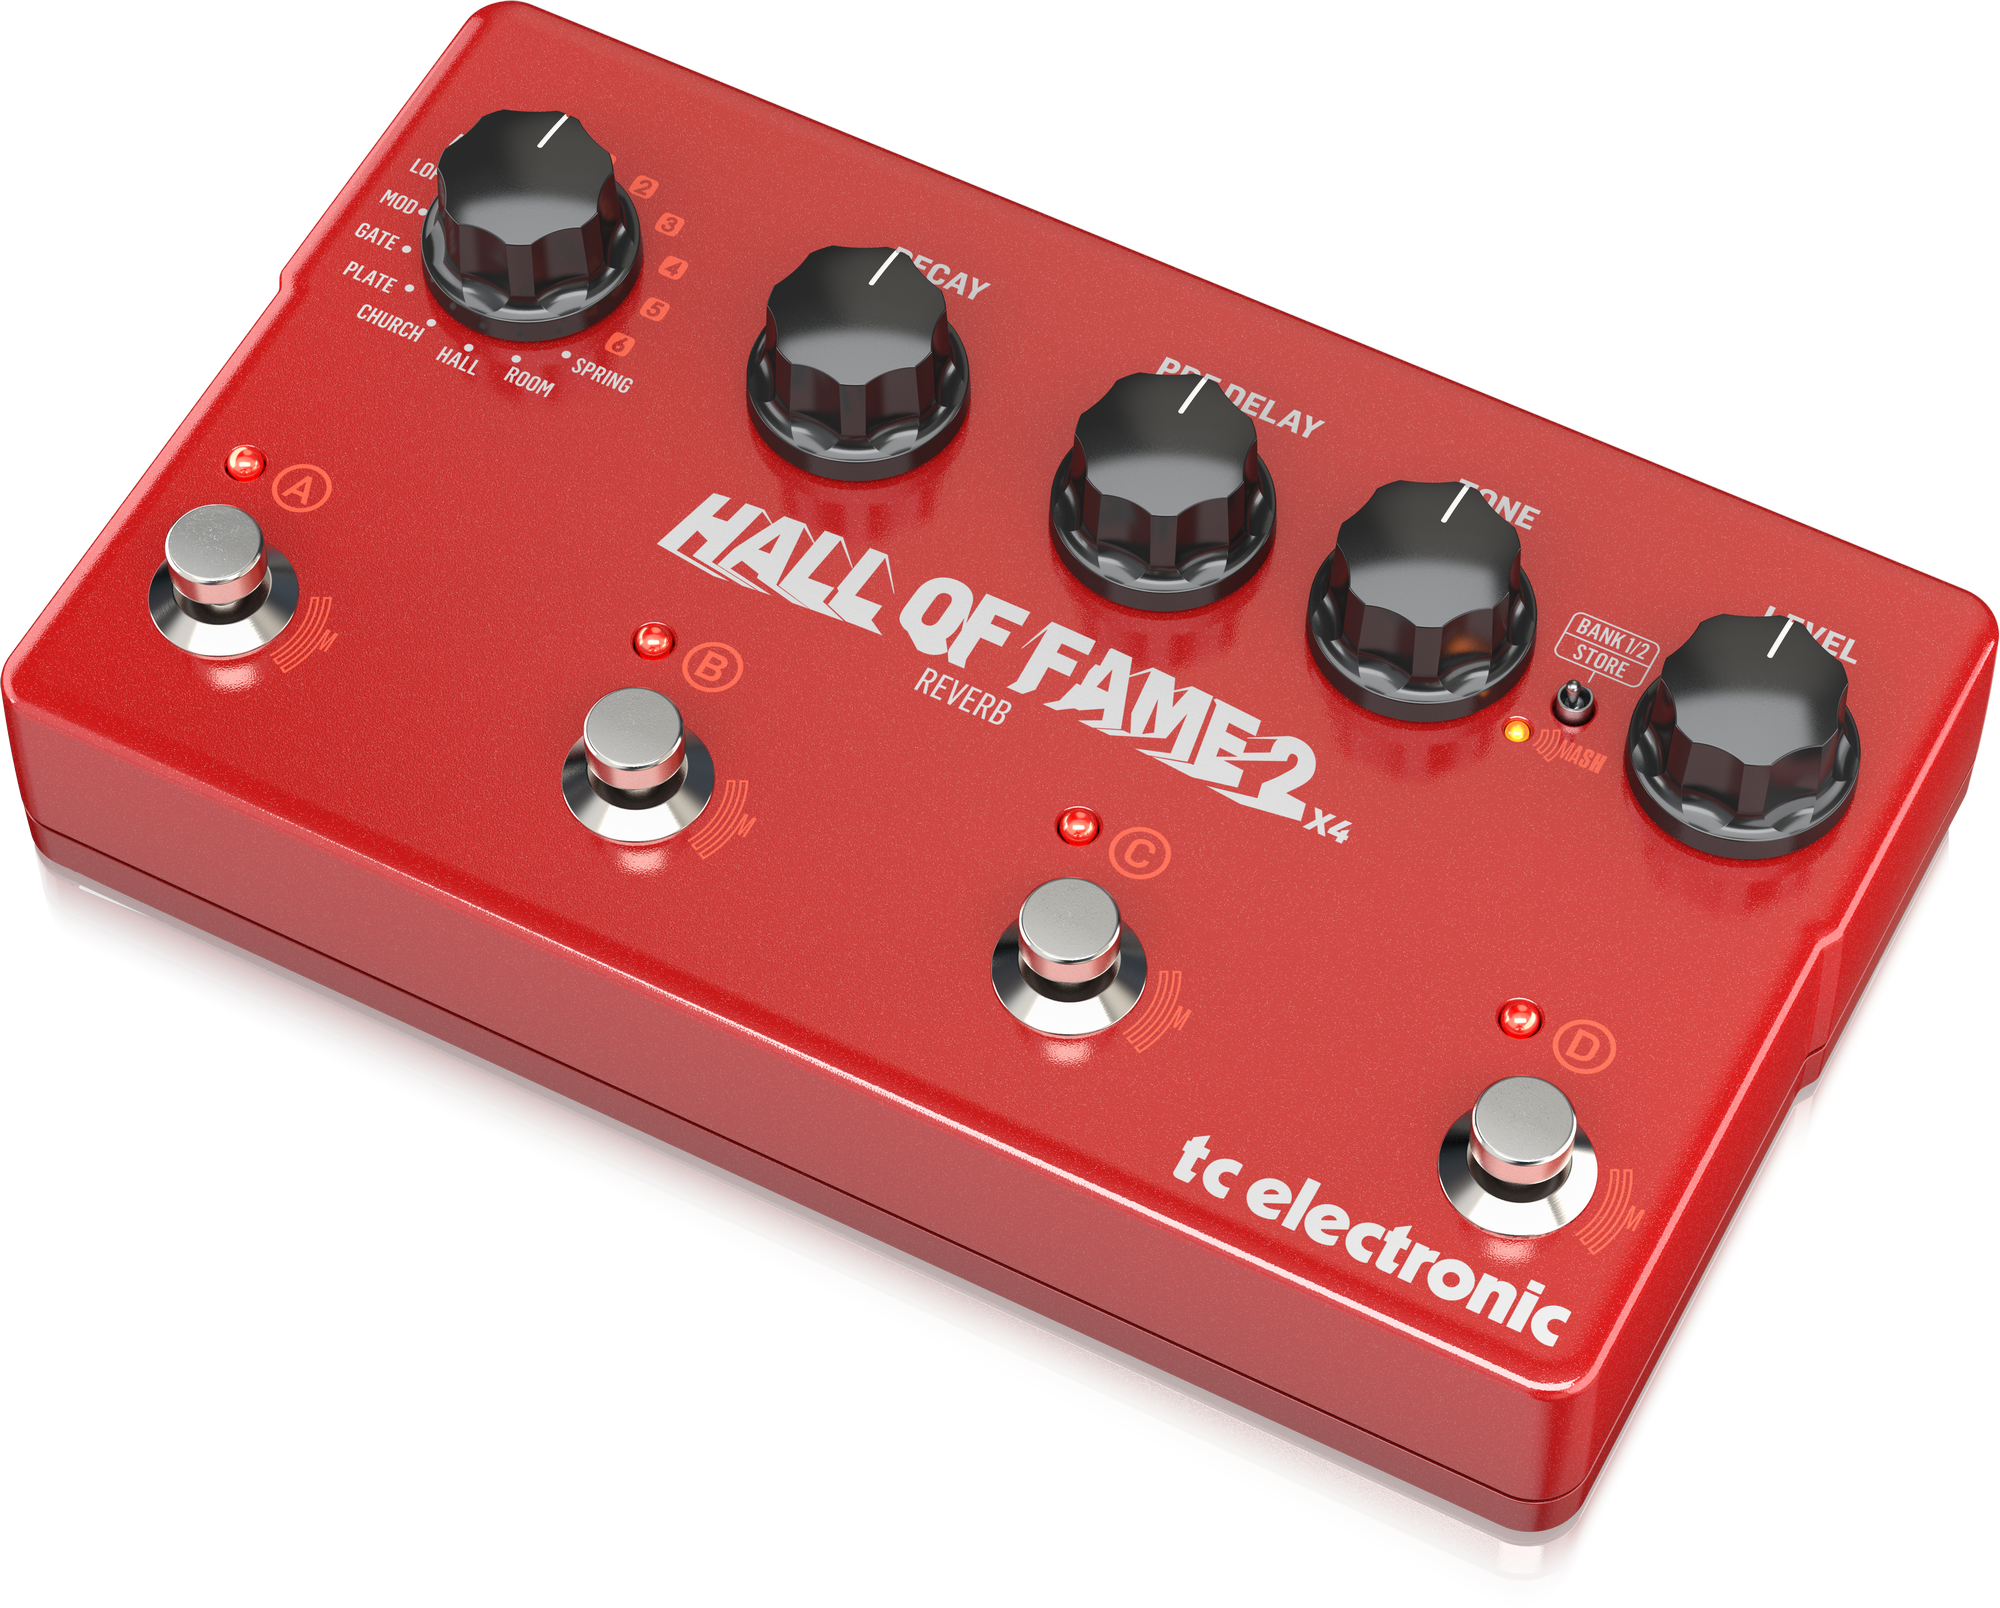 TC Electronic Hall Of Fame 2 X4 Reverb  Acclaimed Reverb Pedal Expanded with 4 MASH Switches, Shimmer Reverb and 8 Reverb Presets, TC ELECTRONIC, EFFECTS, tc-electronic-effects-tc-hall-of-fame-2-x4-reverb, ZOSO MUSIC SDN BHD